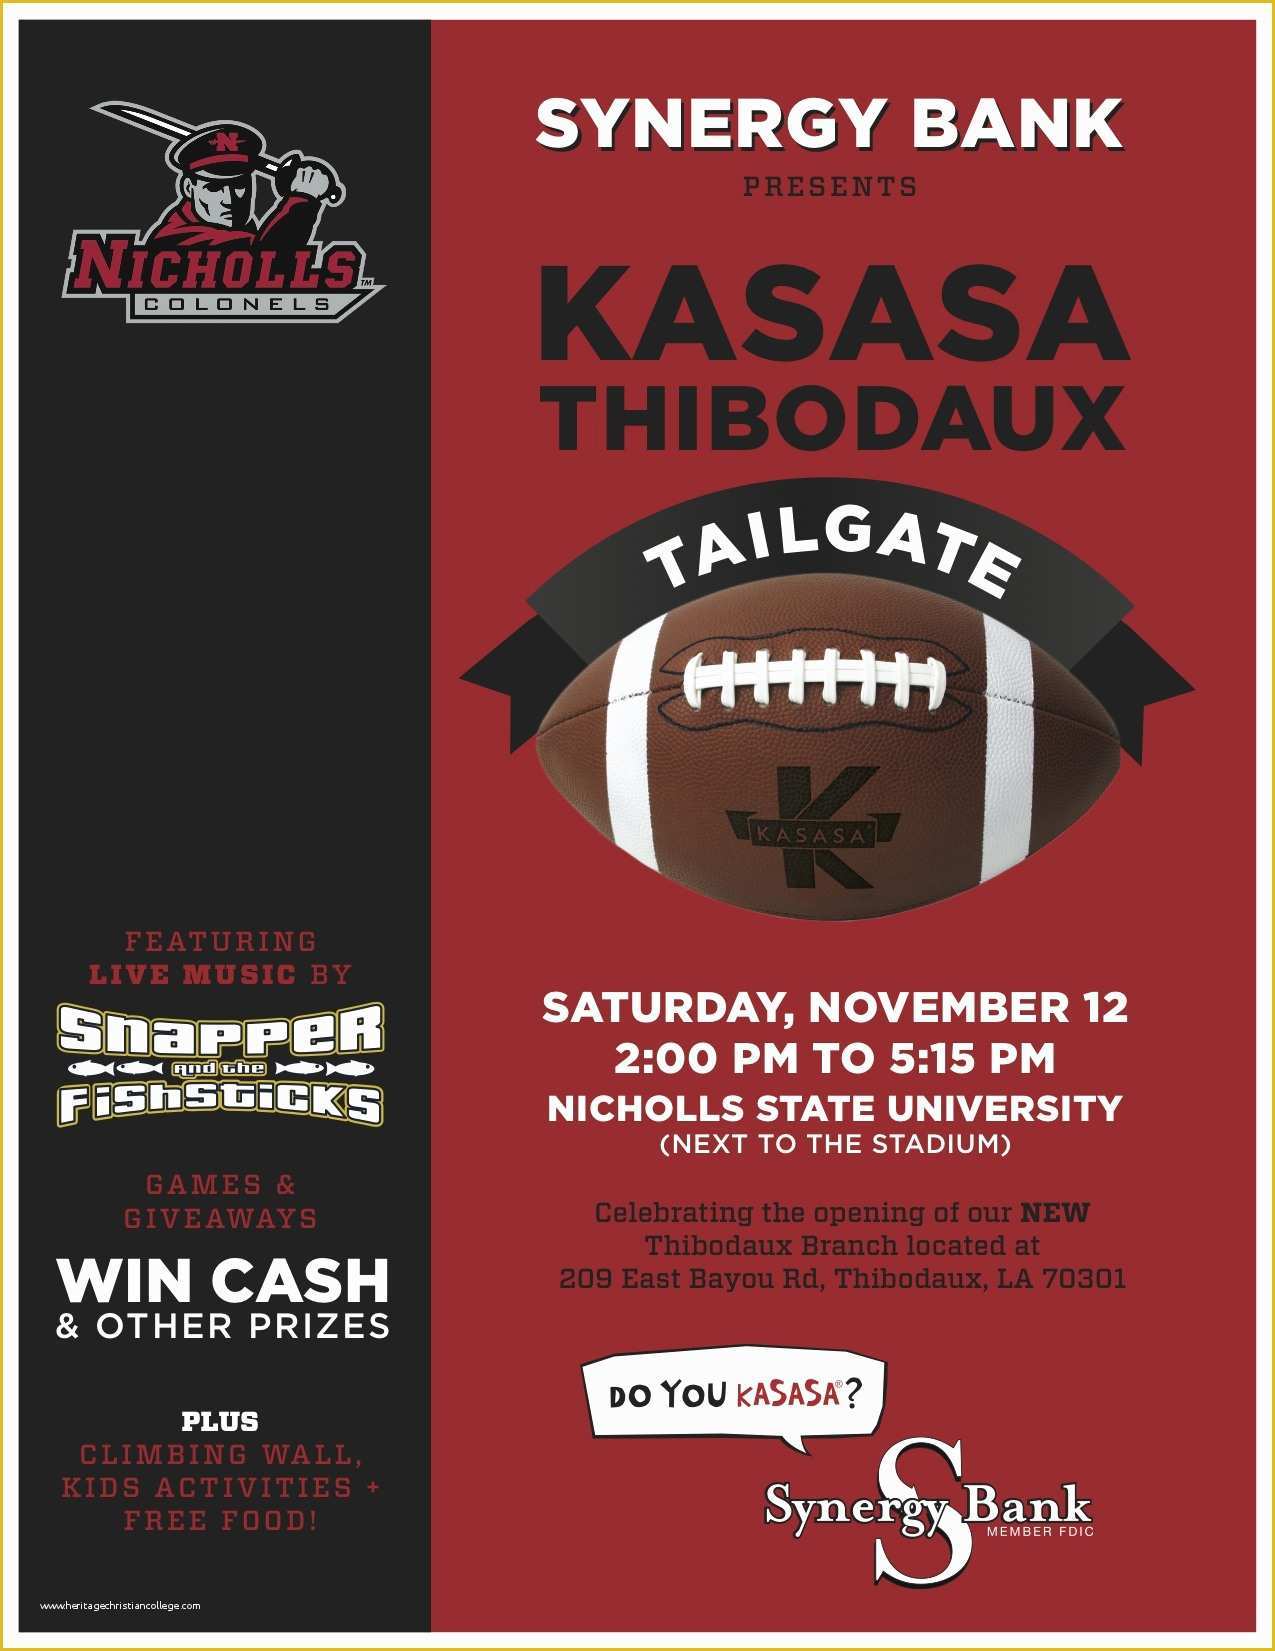 Free Tailgate Party Flyer Template Of Up Ing Kasasafied events Kasasa Blog